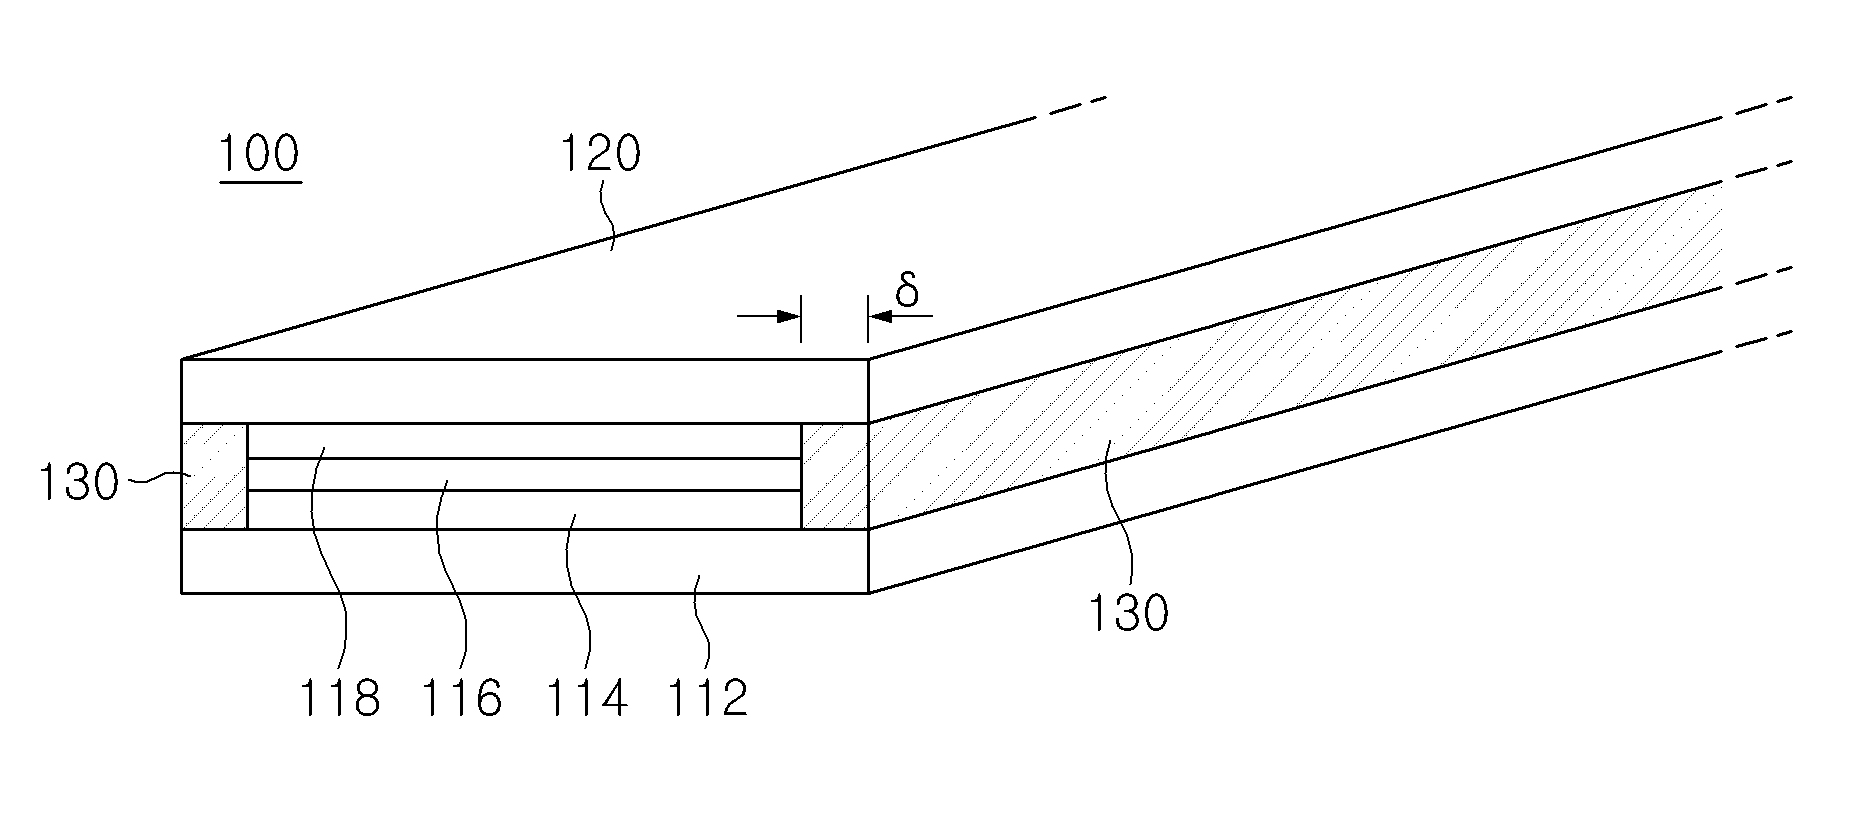 Superconducting wire material having laminated structure and manufacturing method therefor